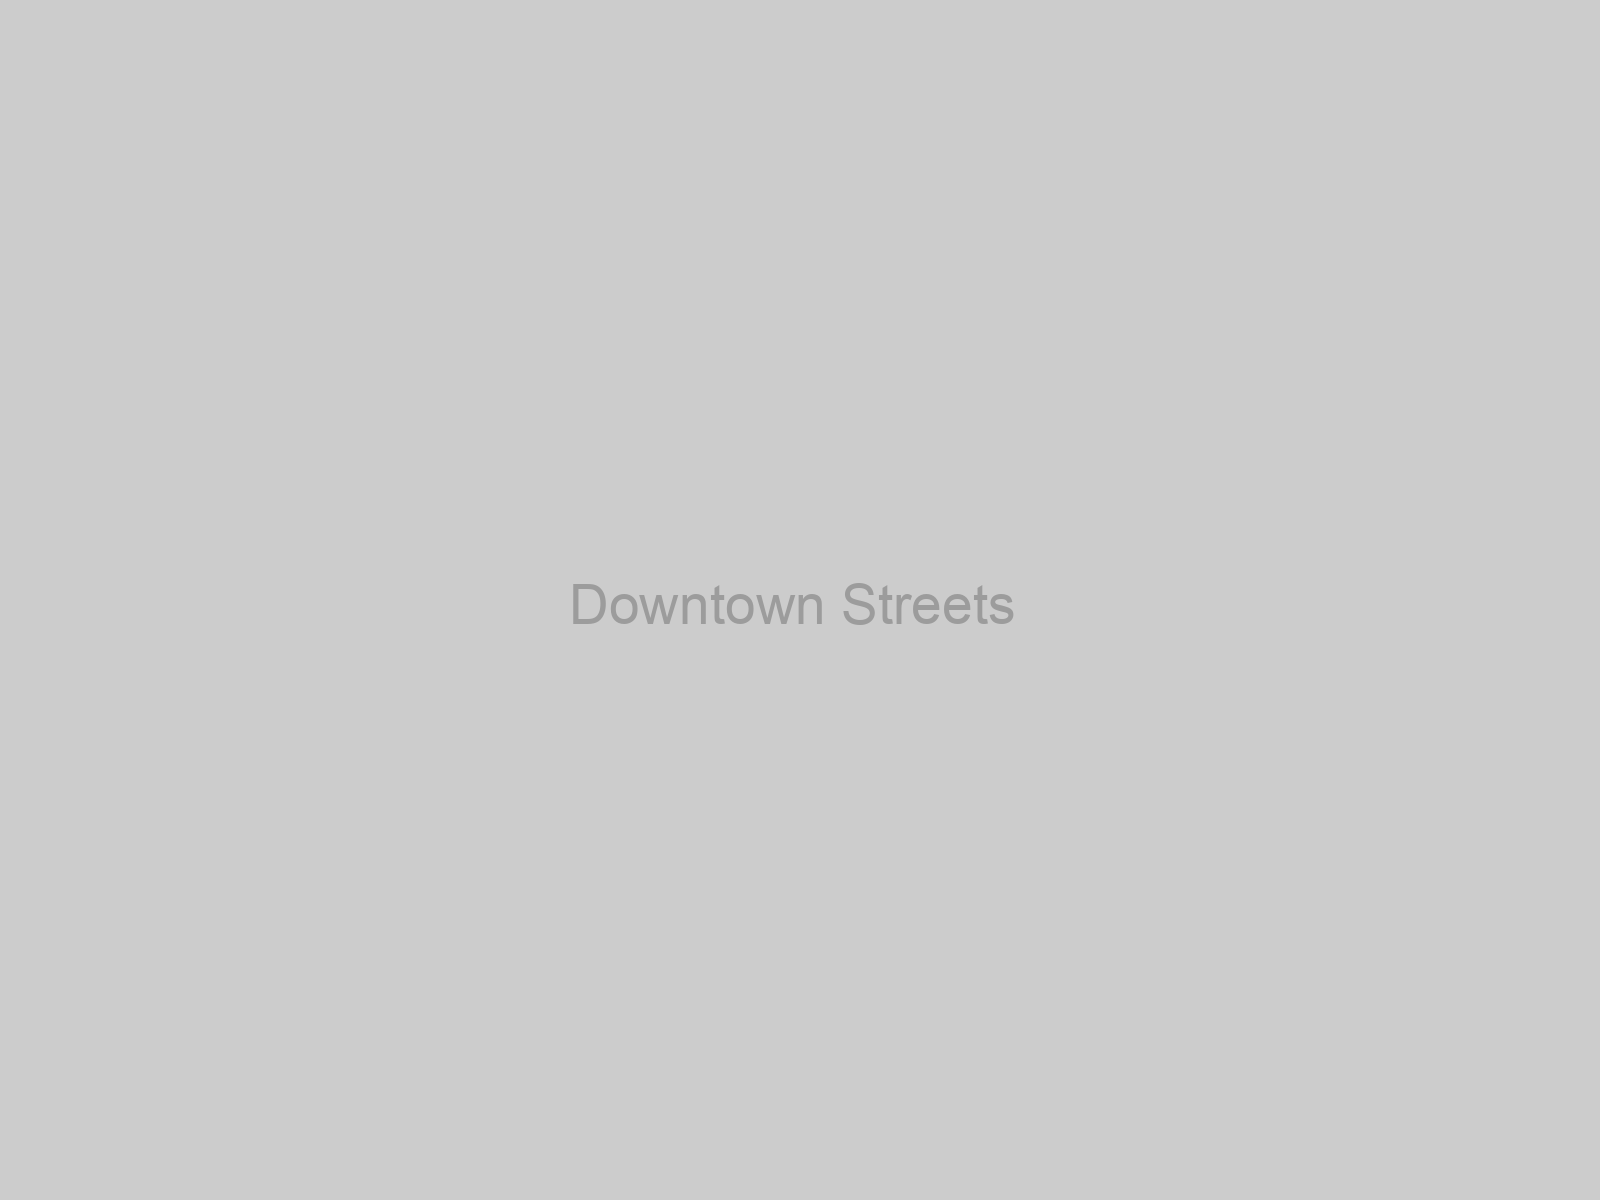 Downtown Streets & Traffic Project